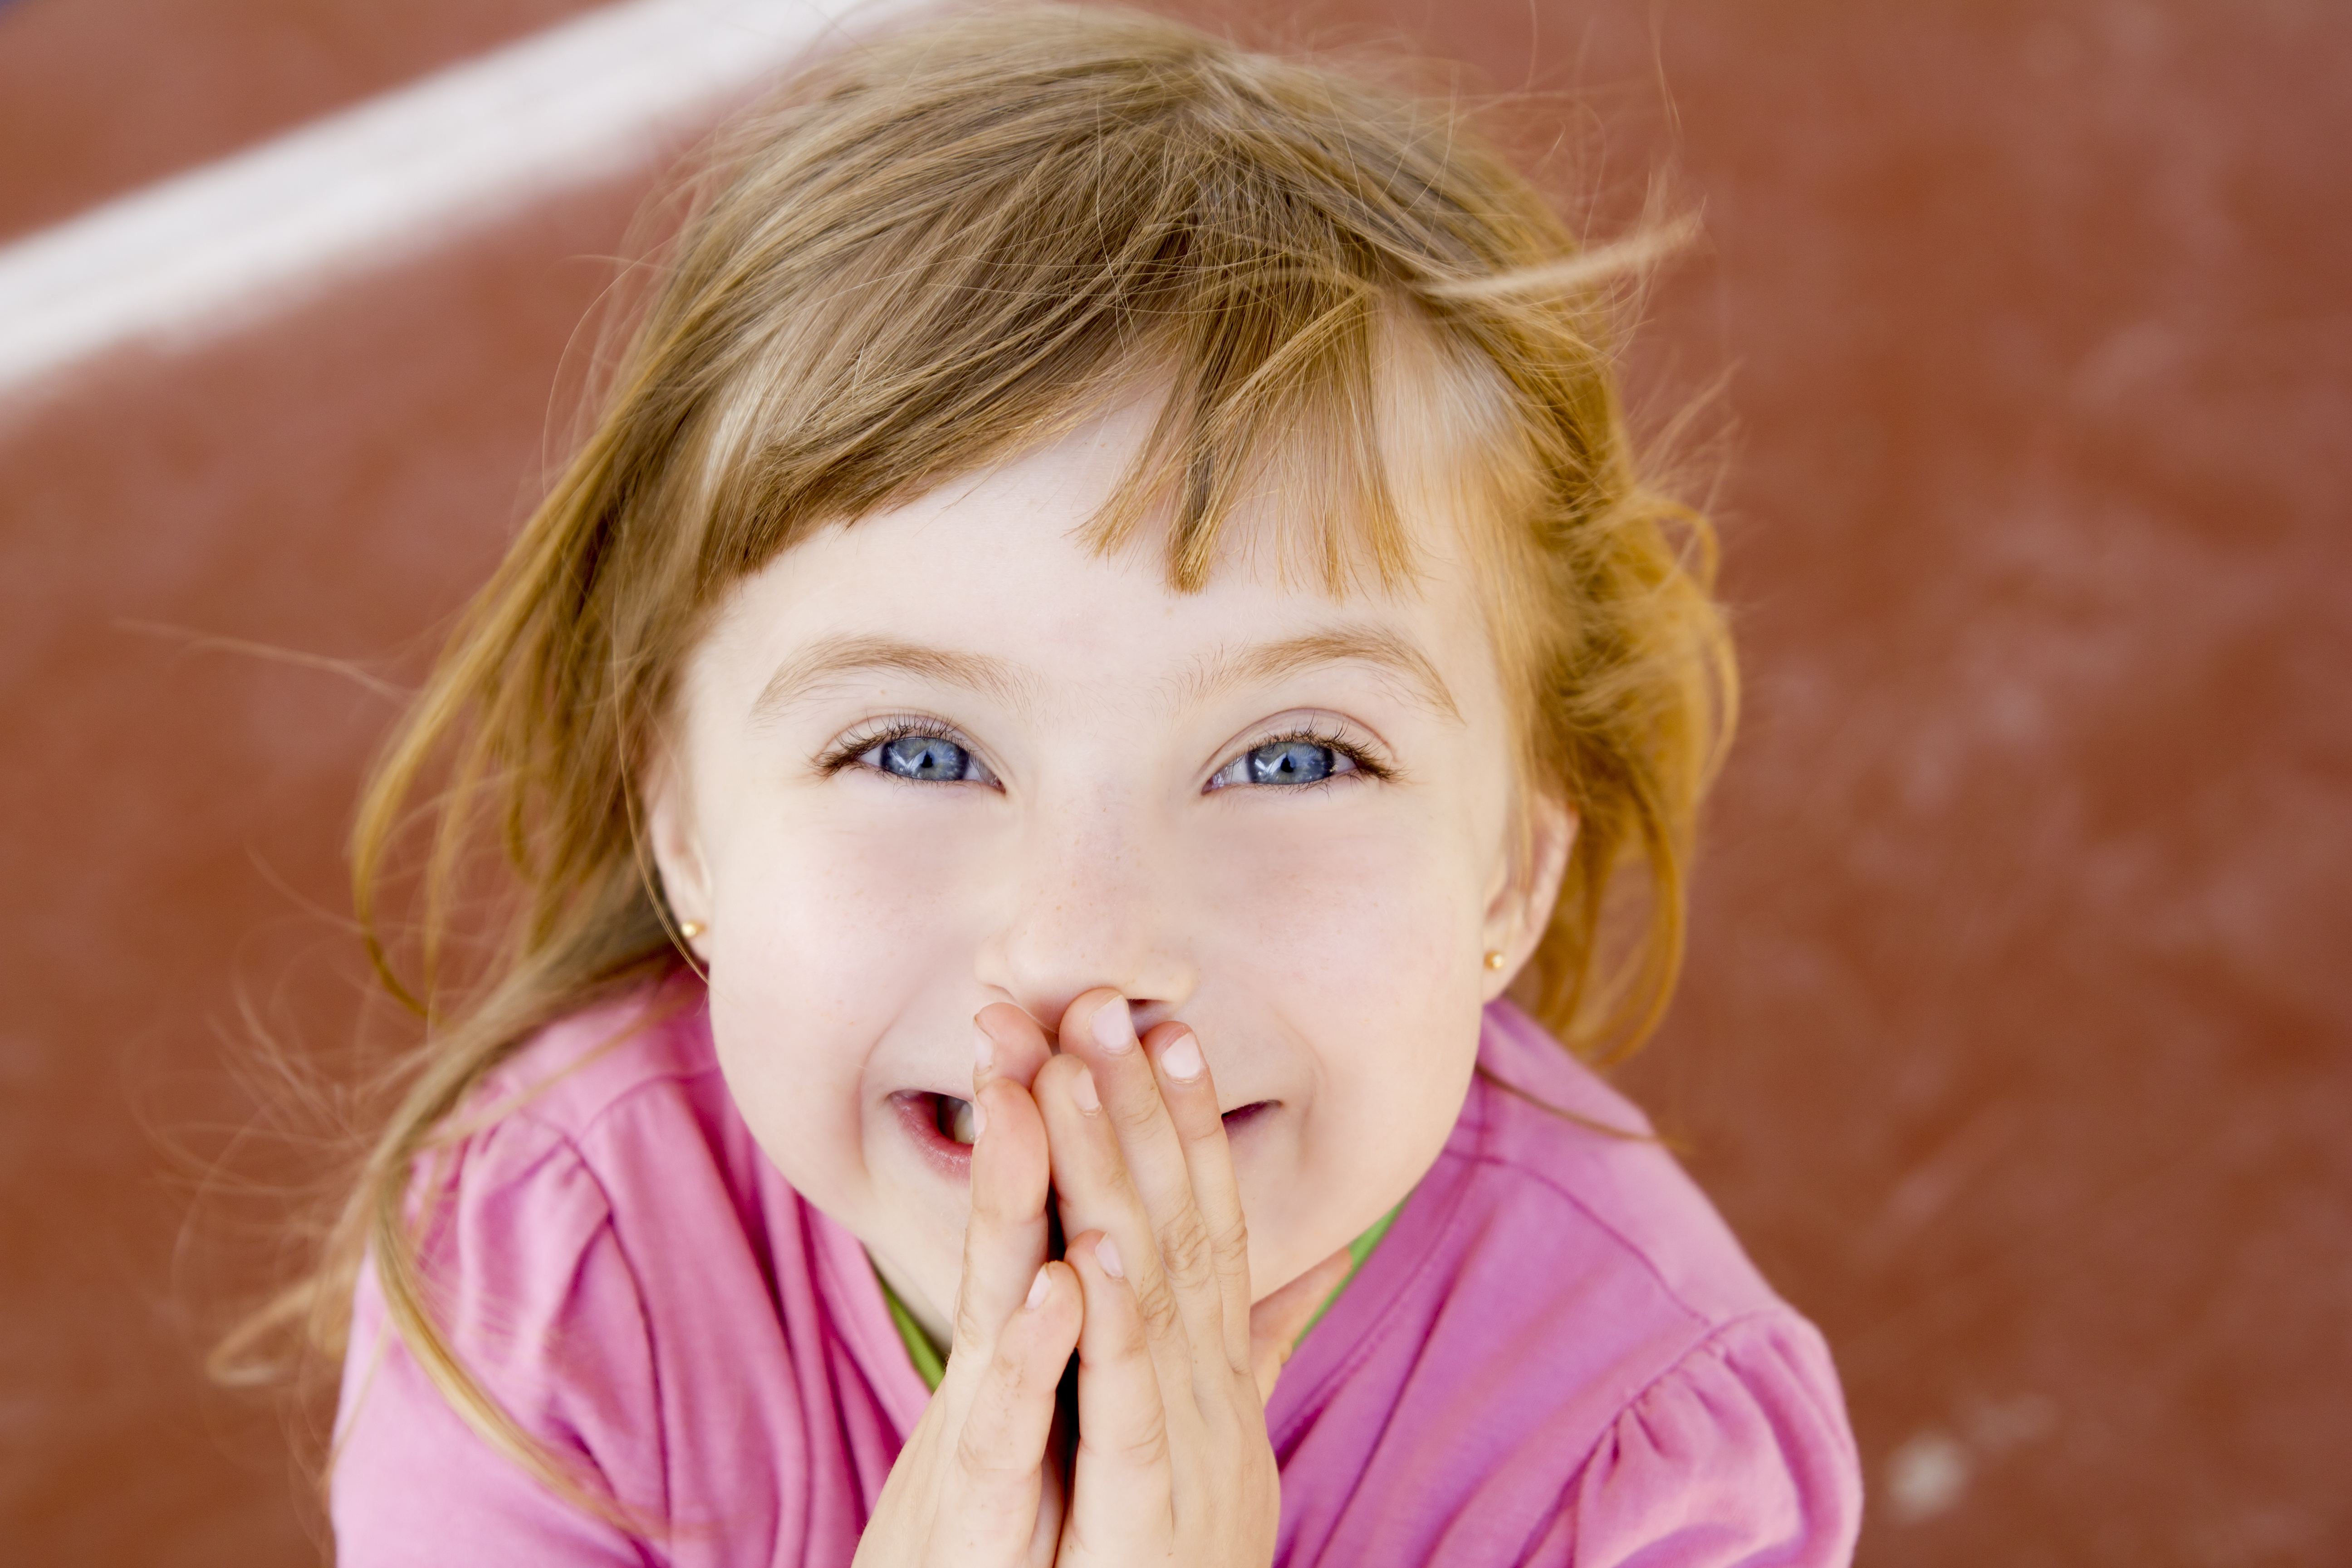 Blond happy smiling little girl excited laugh | Source: Getty Images